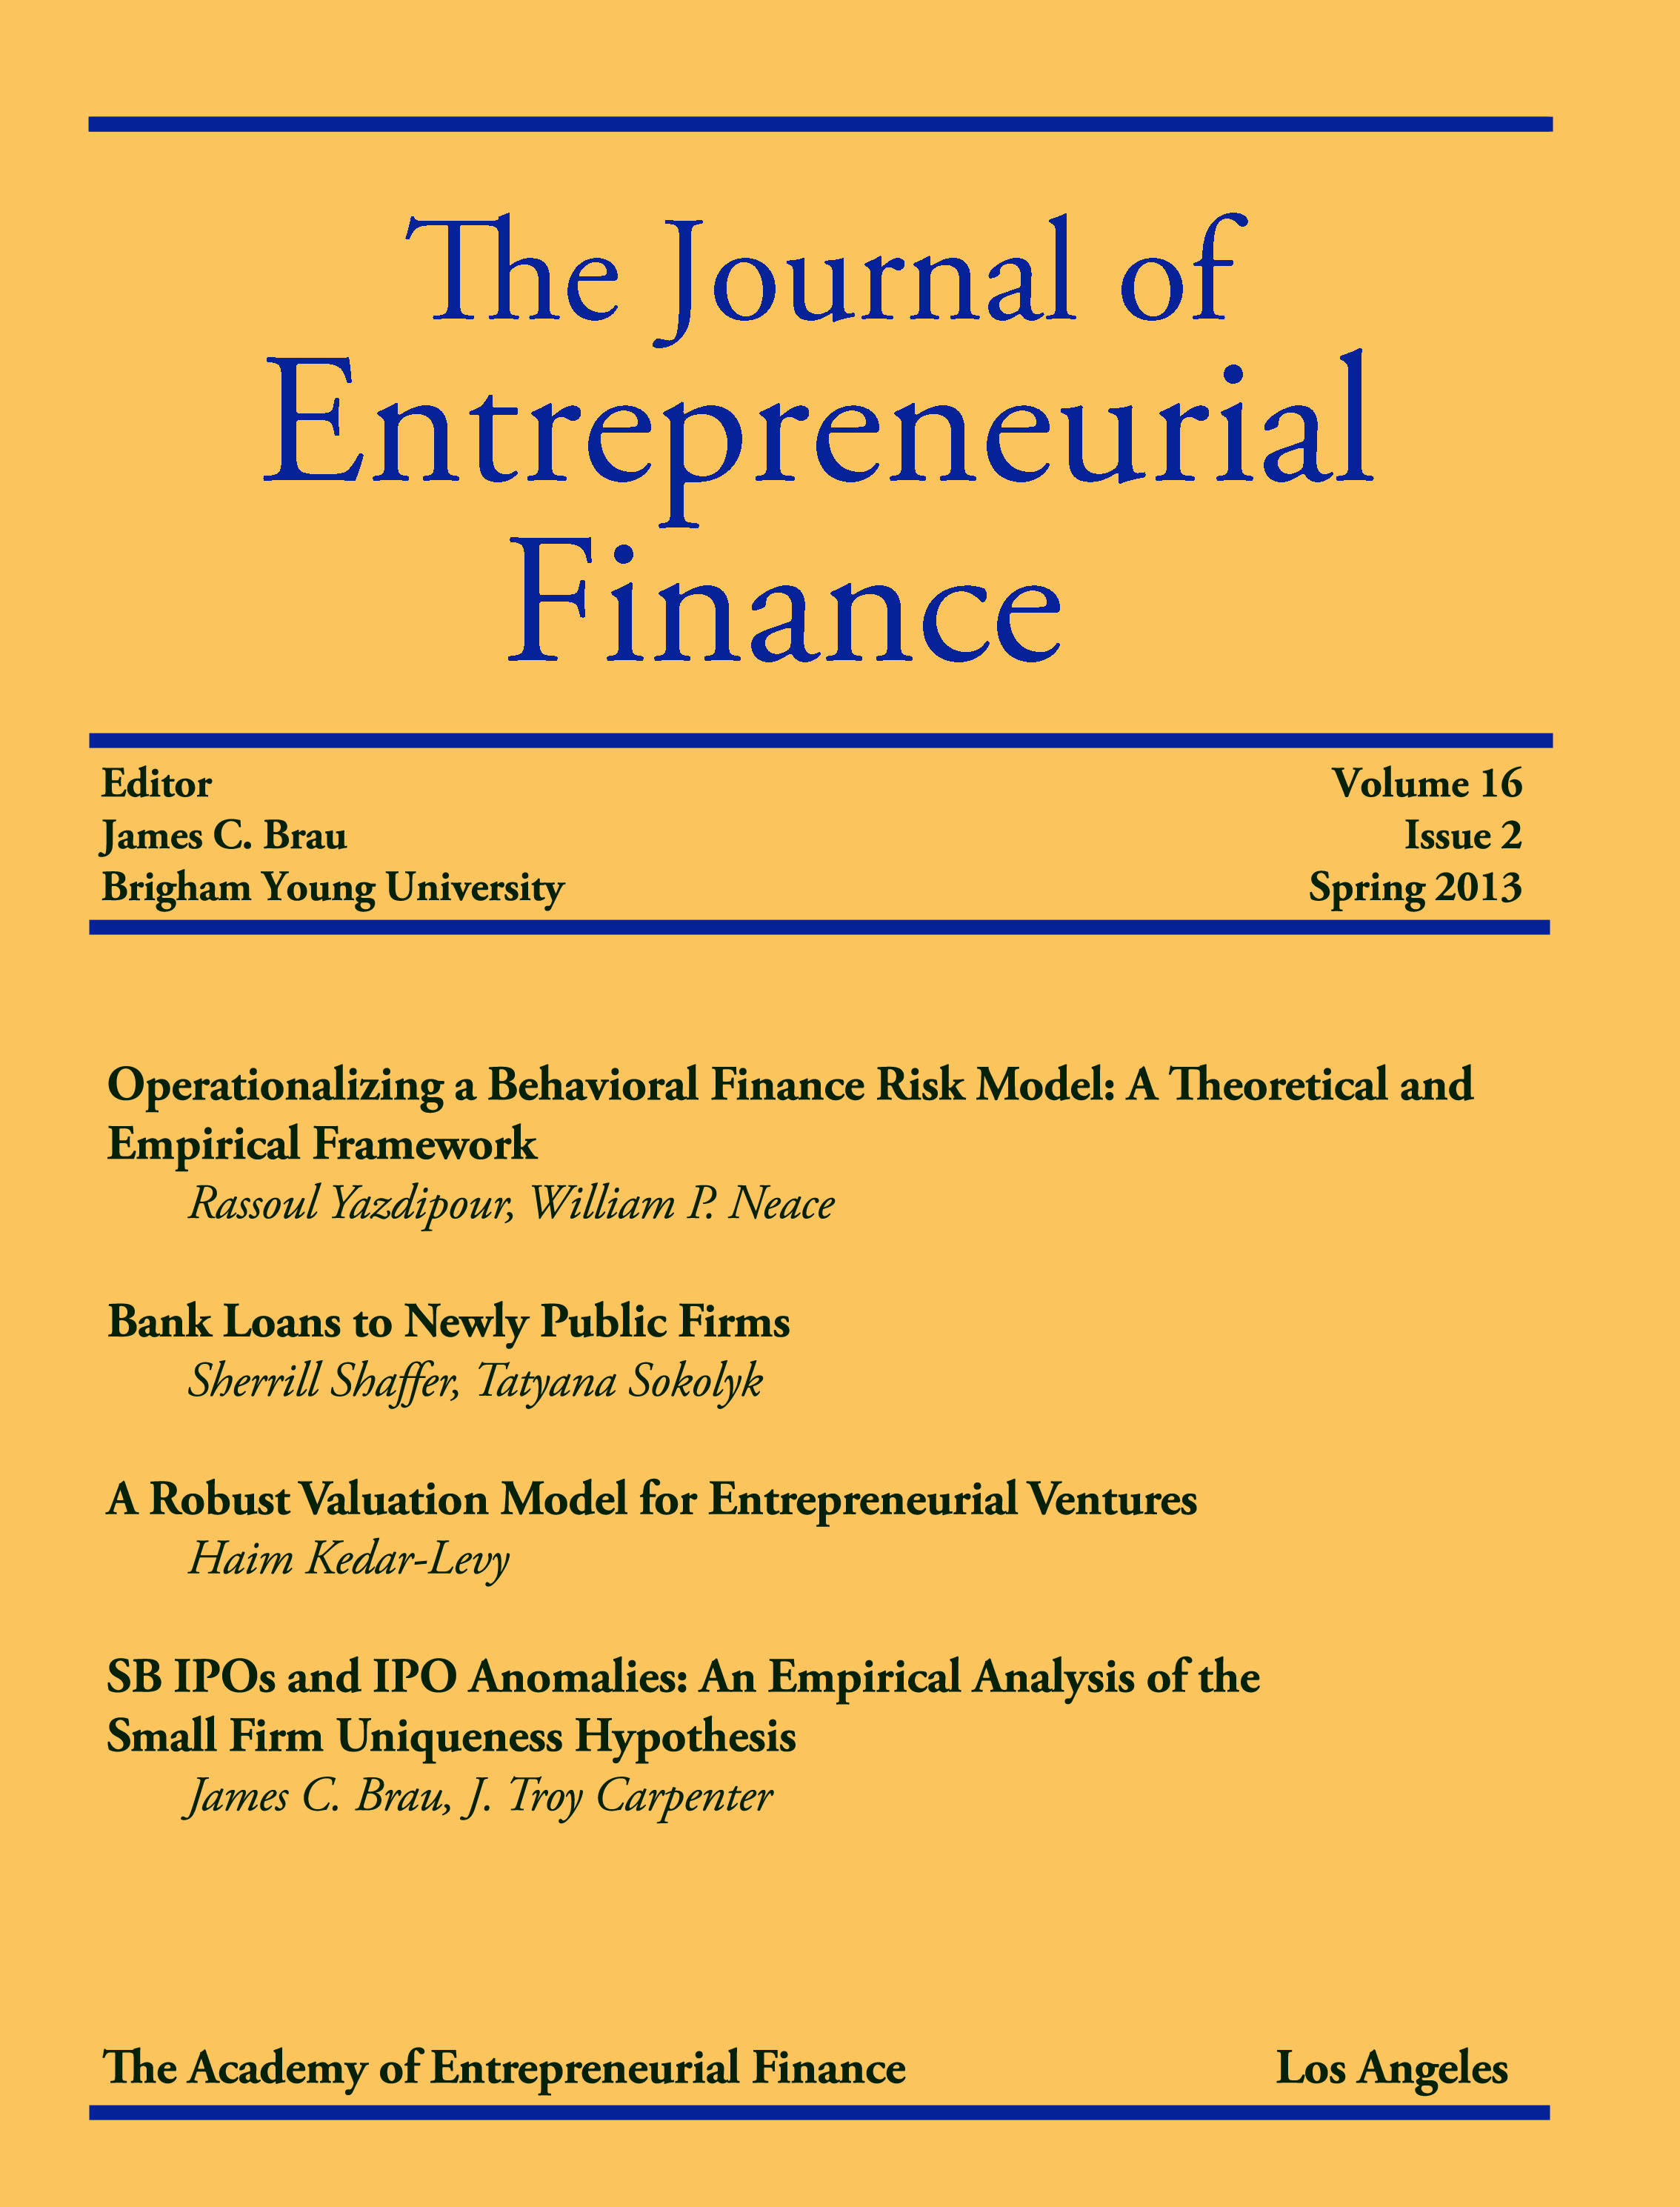 What Is Entrepreneurial Finance